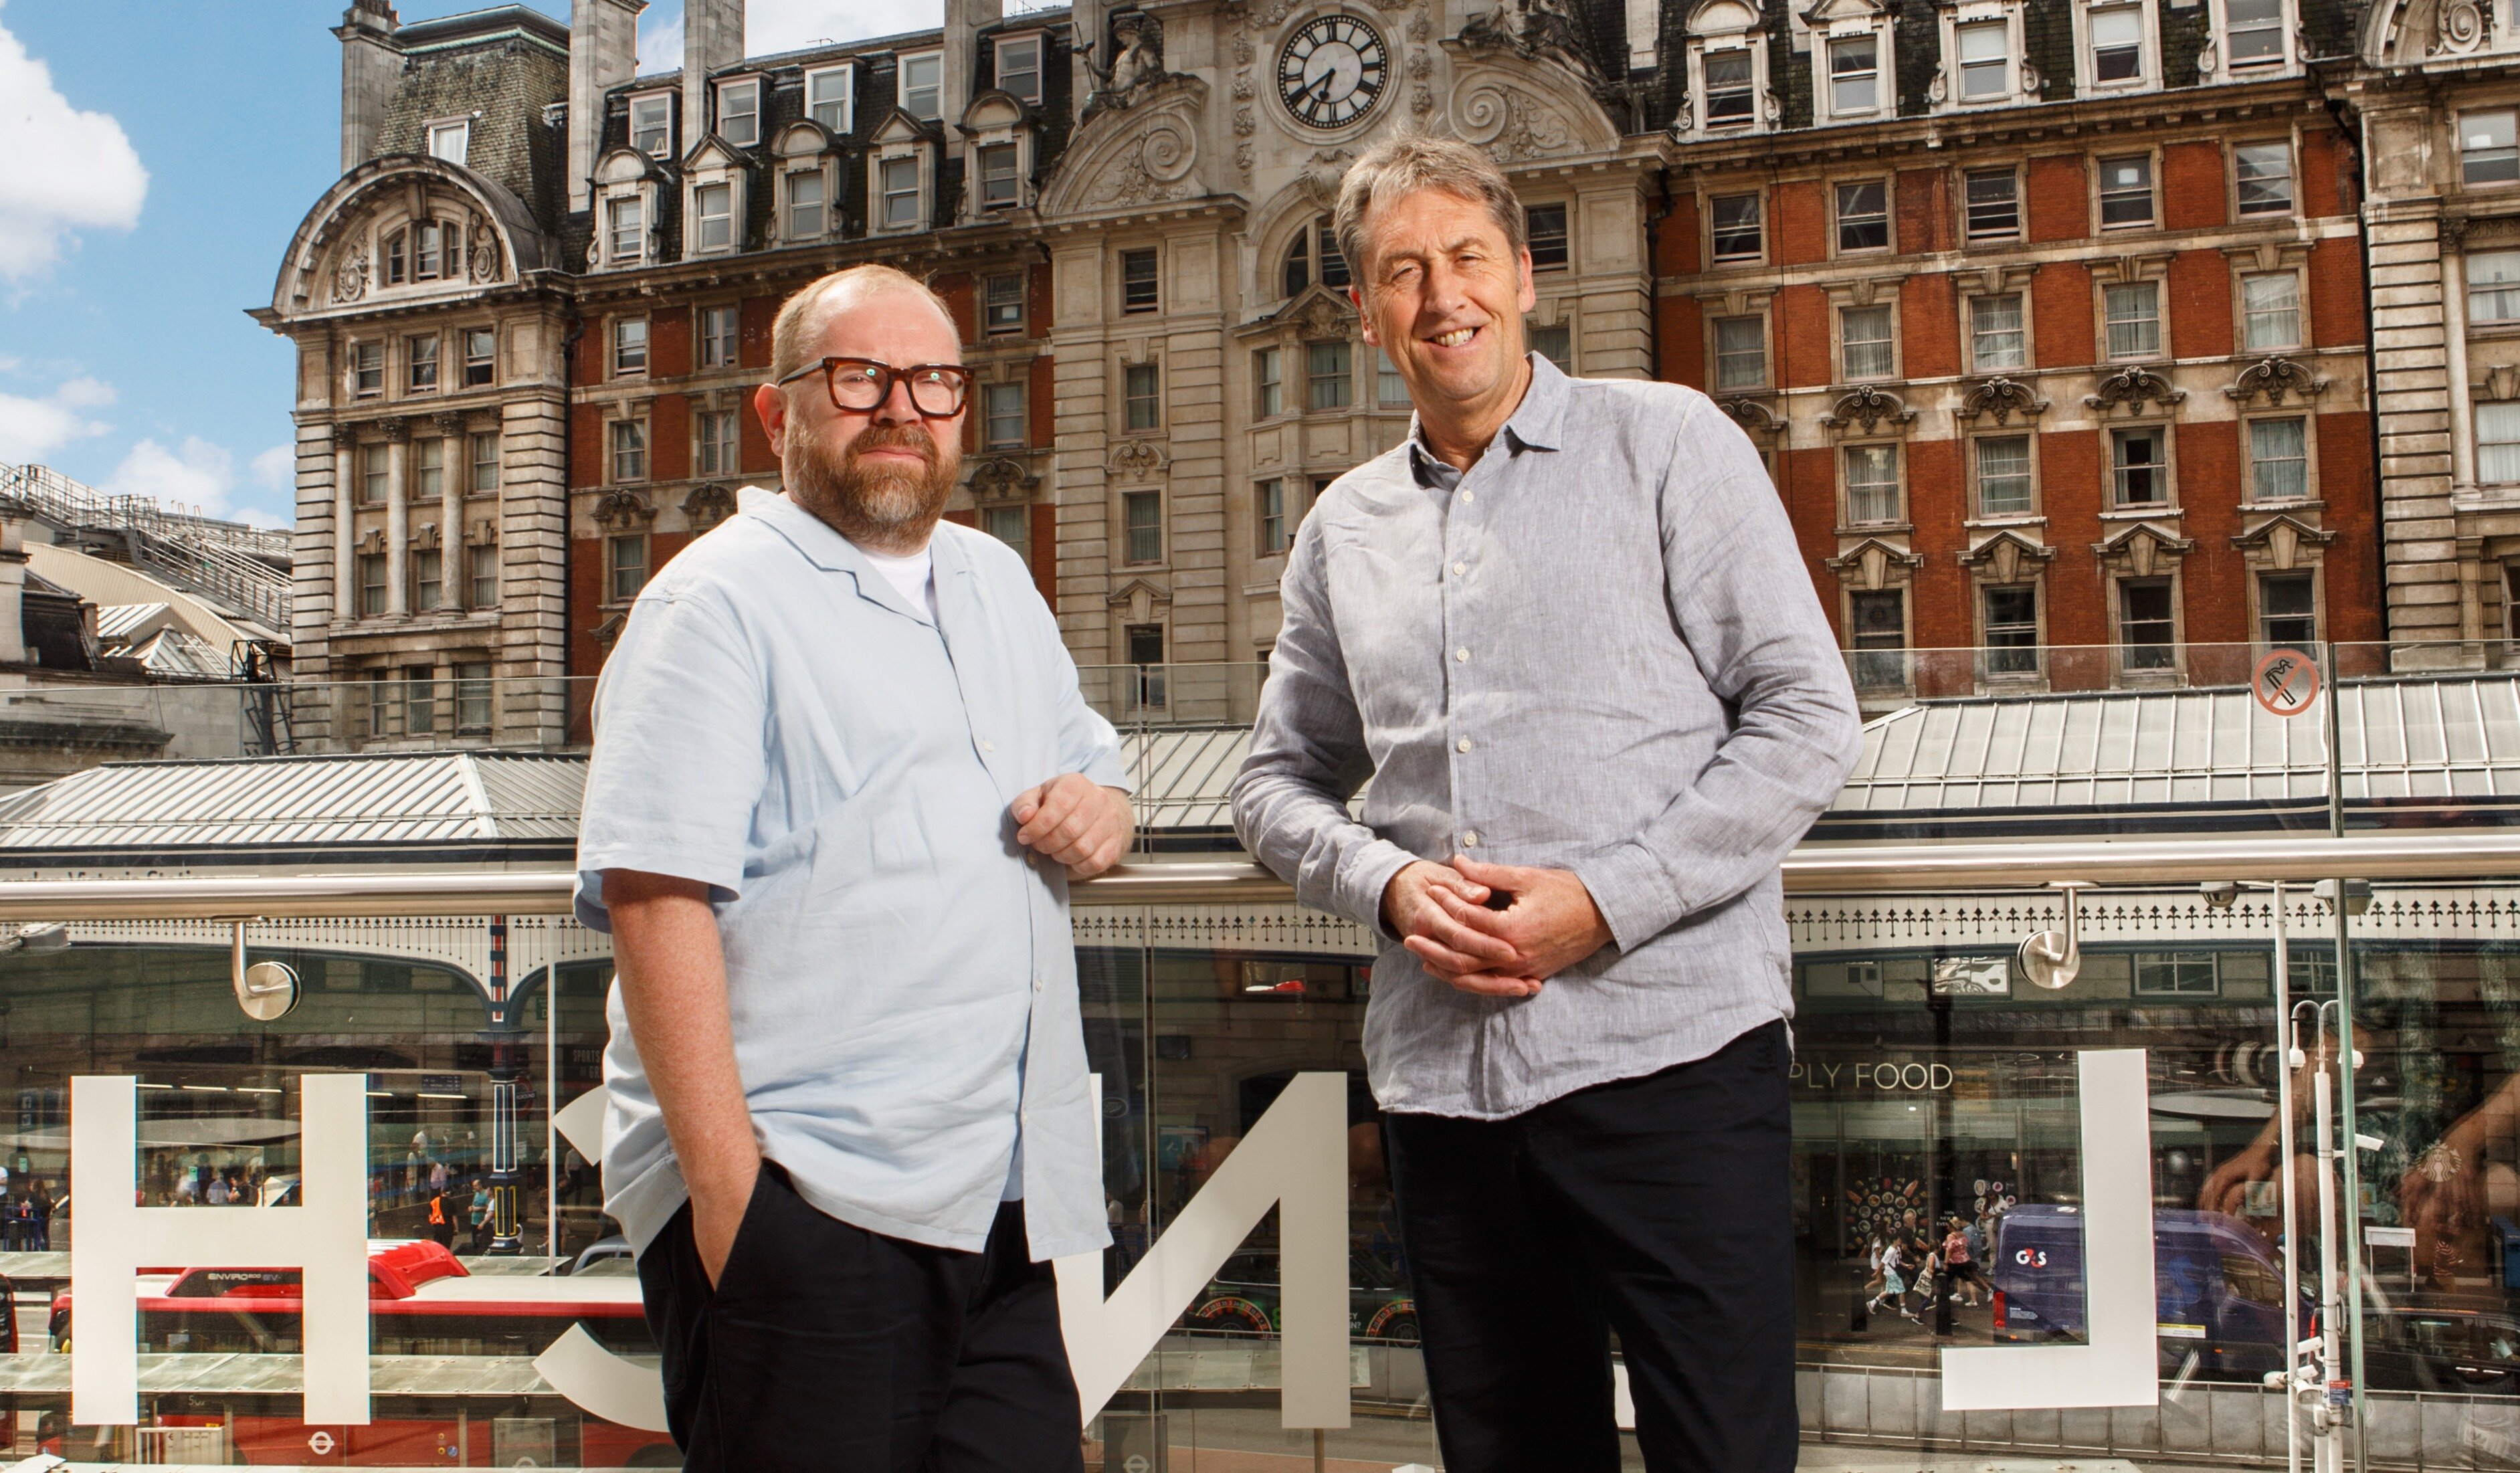 Simon Anderson leaves Market Halls two years after launch